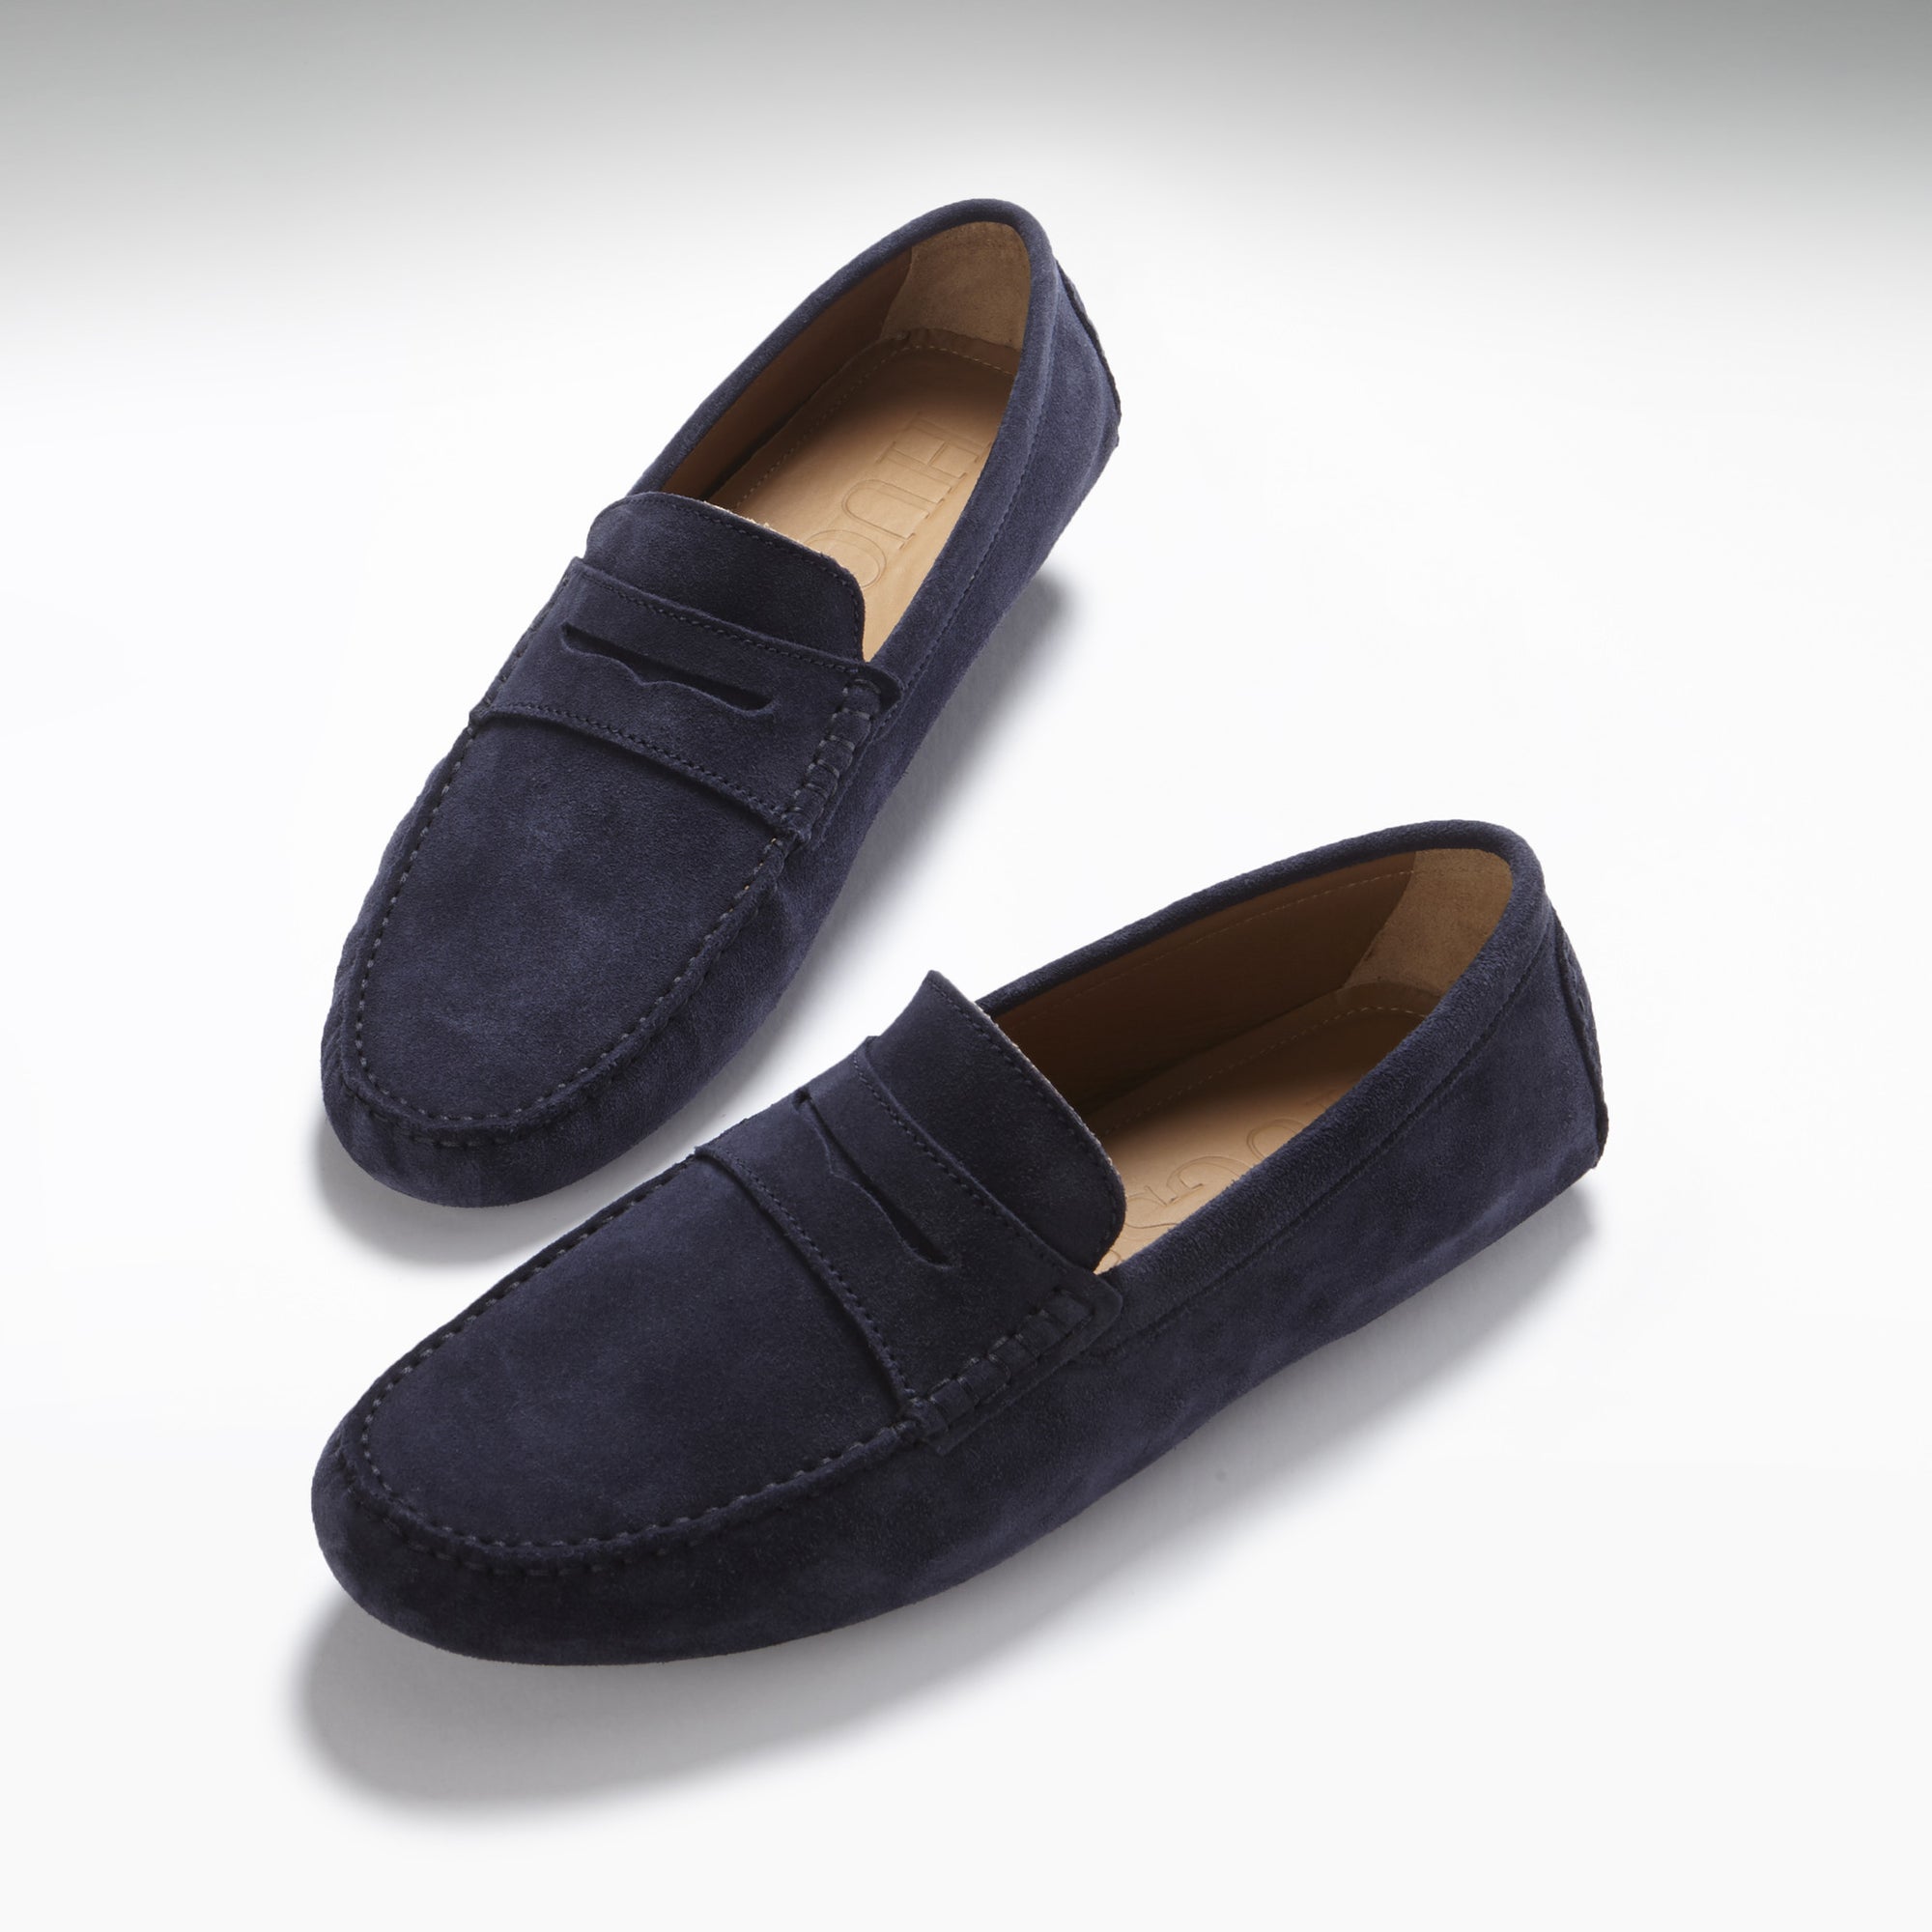 Penny Driving Loafers, navy blue suede - Hugs & Co.